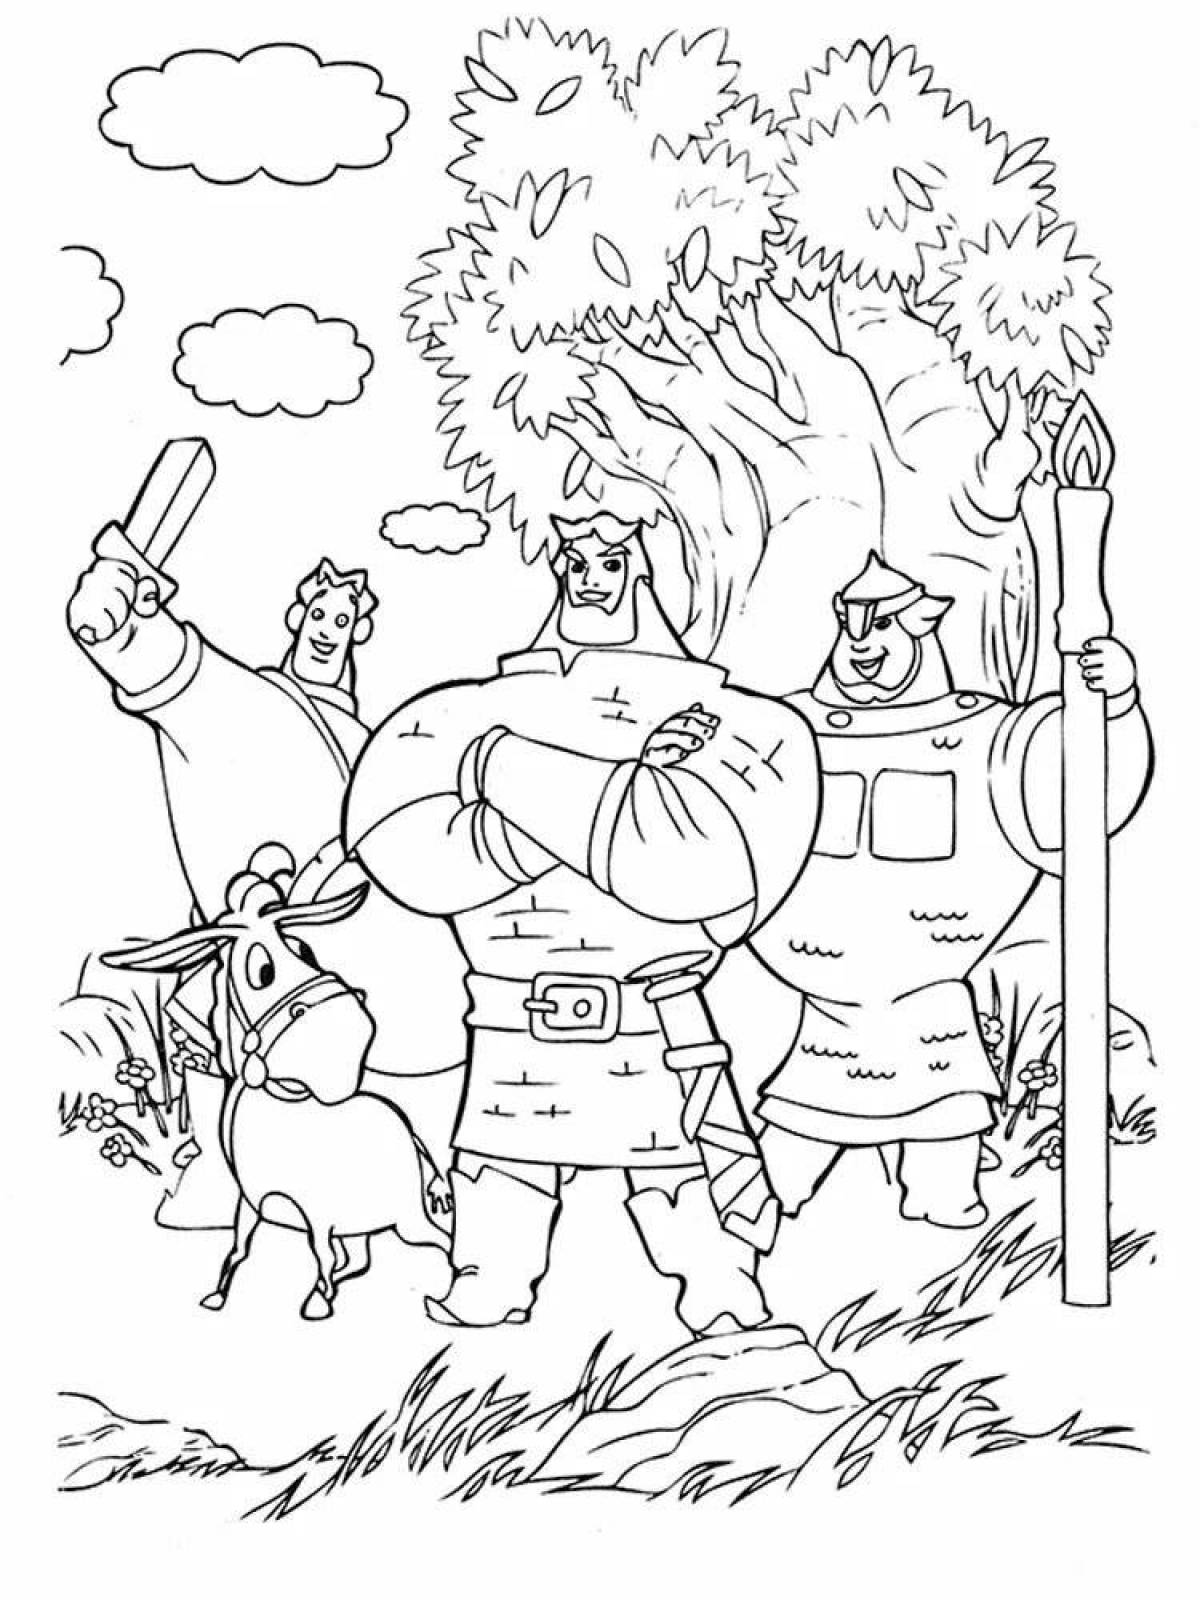 Coloring page sublime ilya muromets